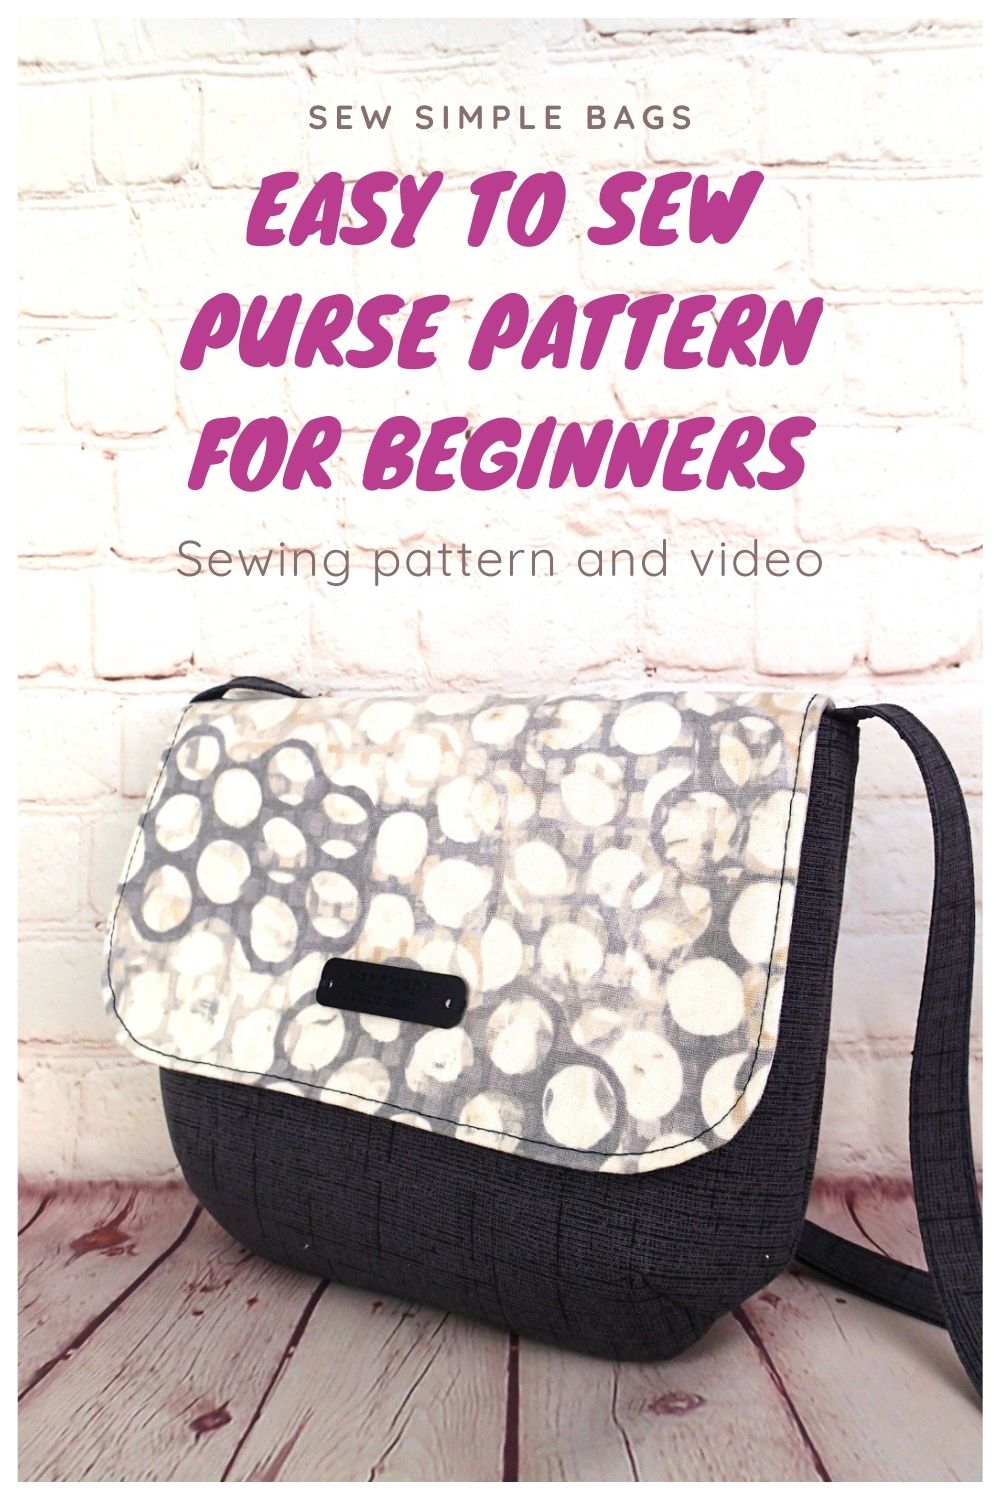 30 Quick And Easy Bag Sewing Patterns - Creative Fashion Blog | Bag patterns  to sew, Simple bags, Vintage bag pattern